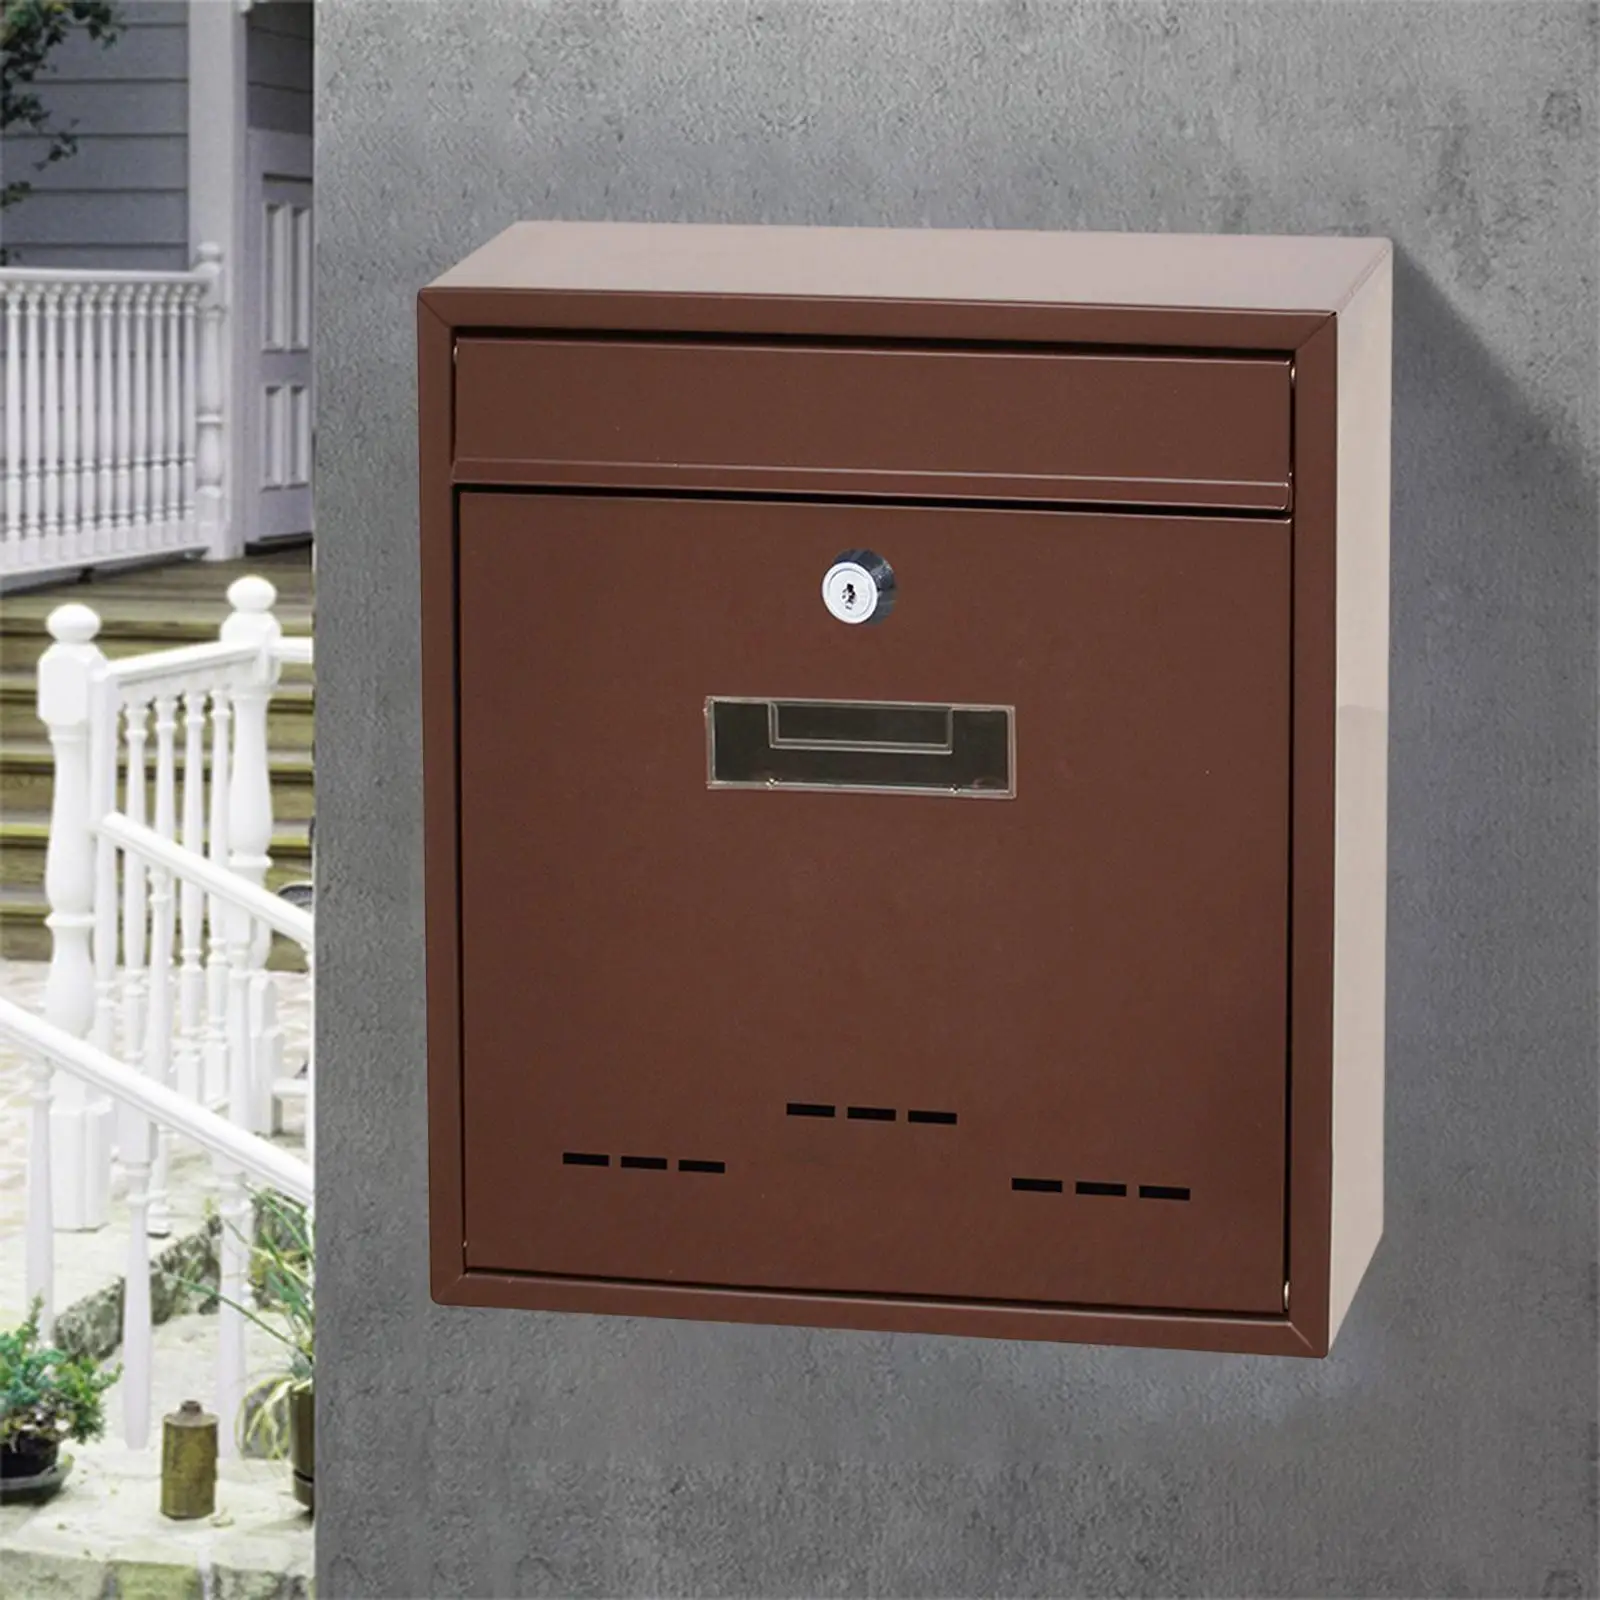 Retro Style Wall Mount Mailbox Lockable Iron Rainproof Mail Box Letter Box Postbox for Gate External door Office